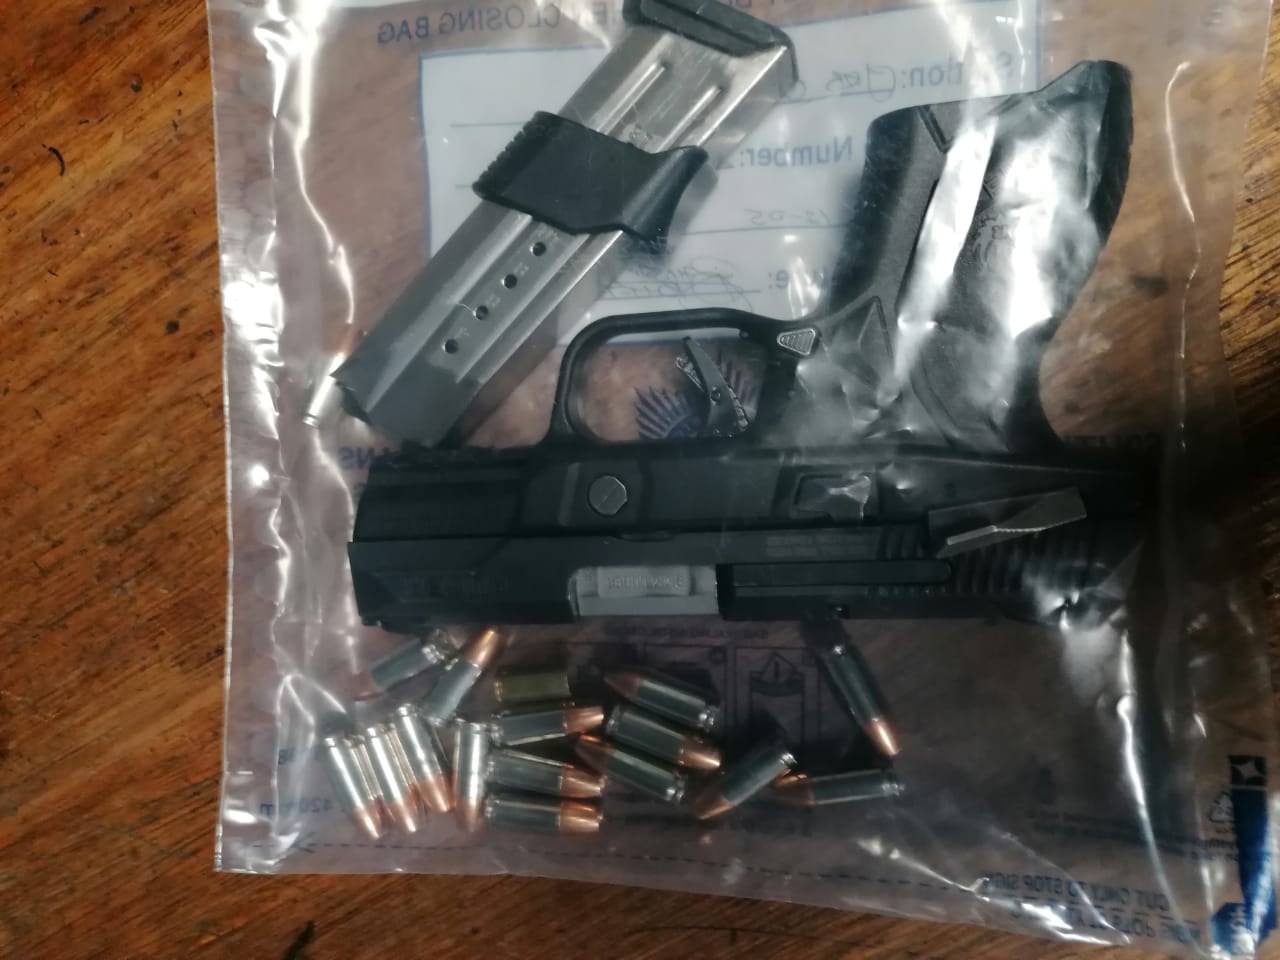 Taxi driver behind bars for possession of an unlicensed firearm and ammunition